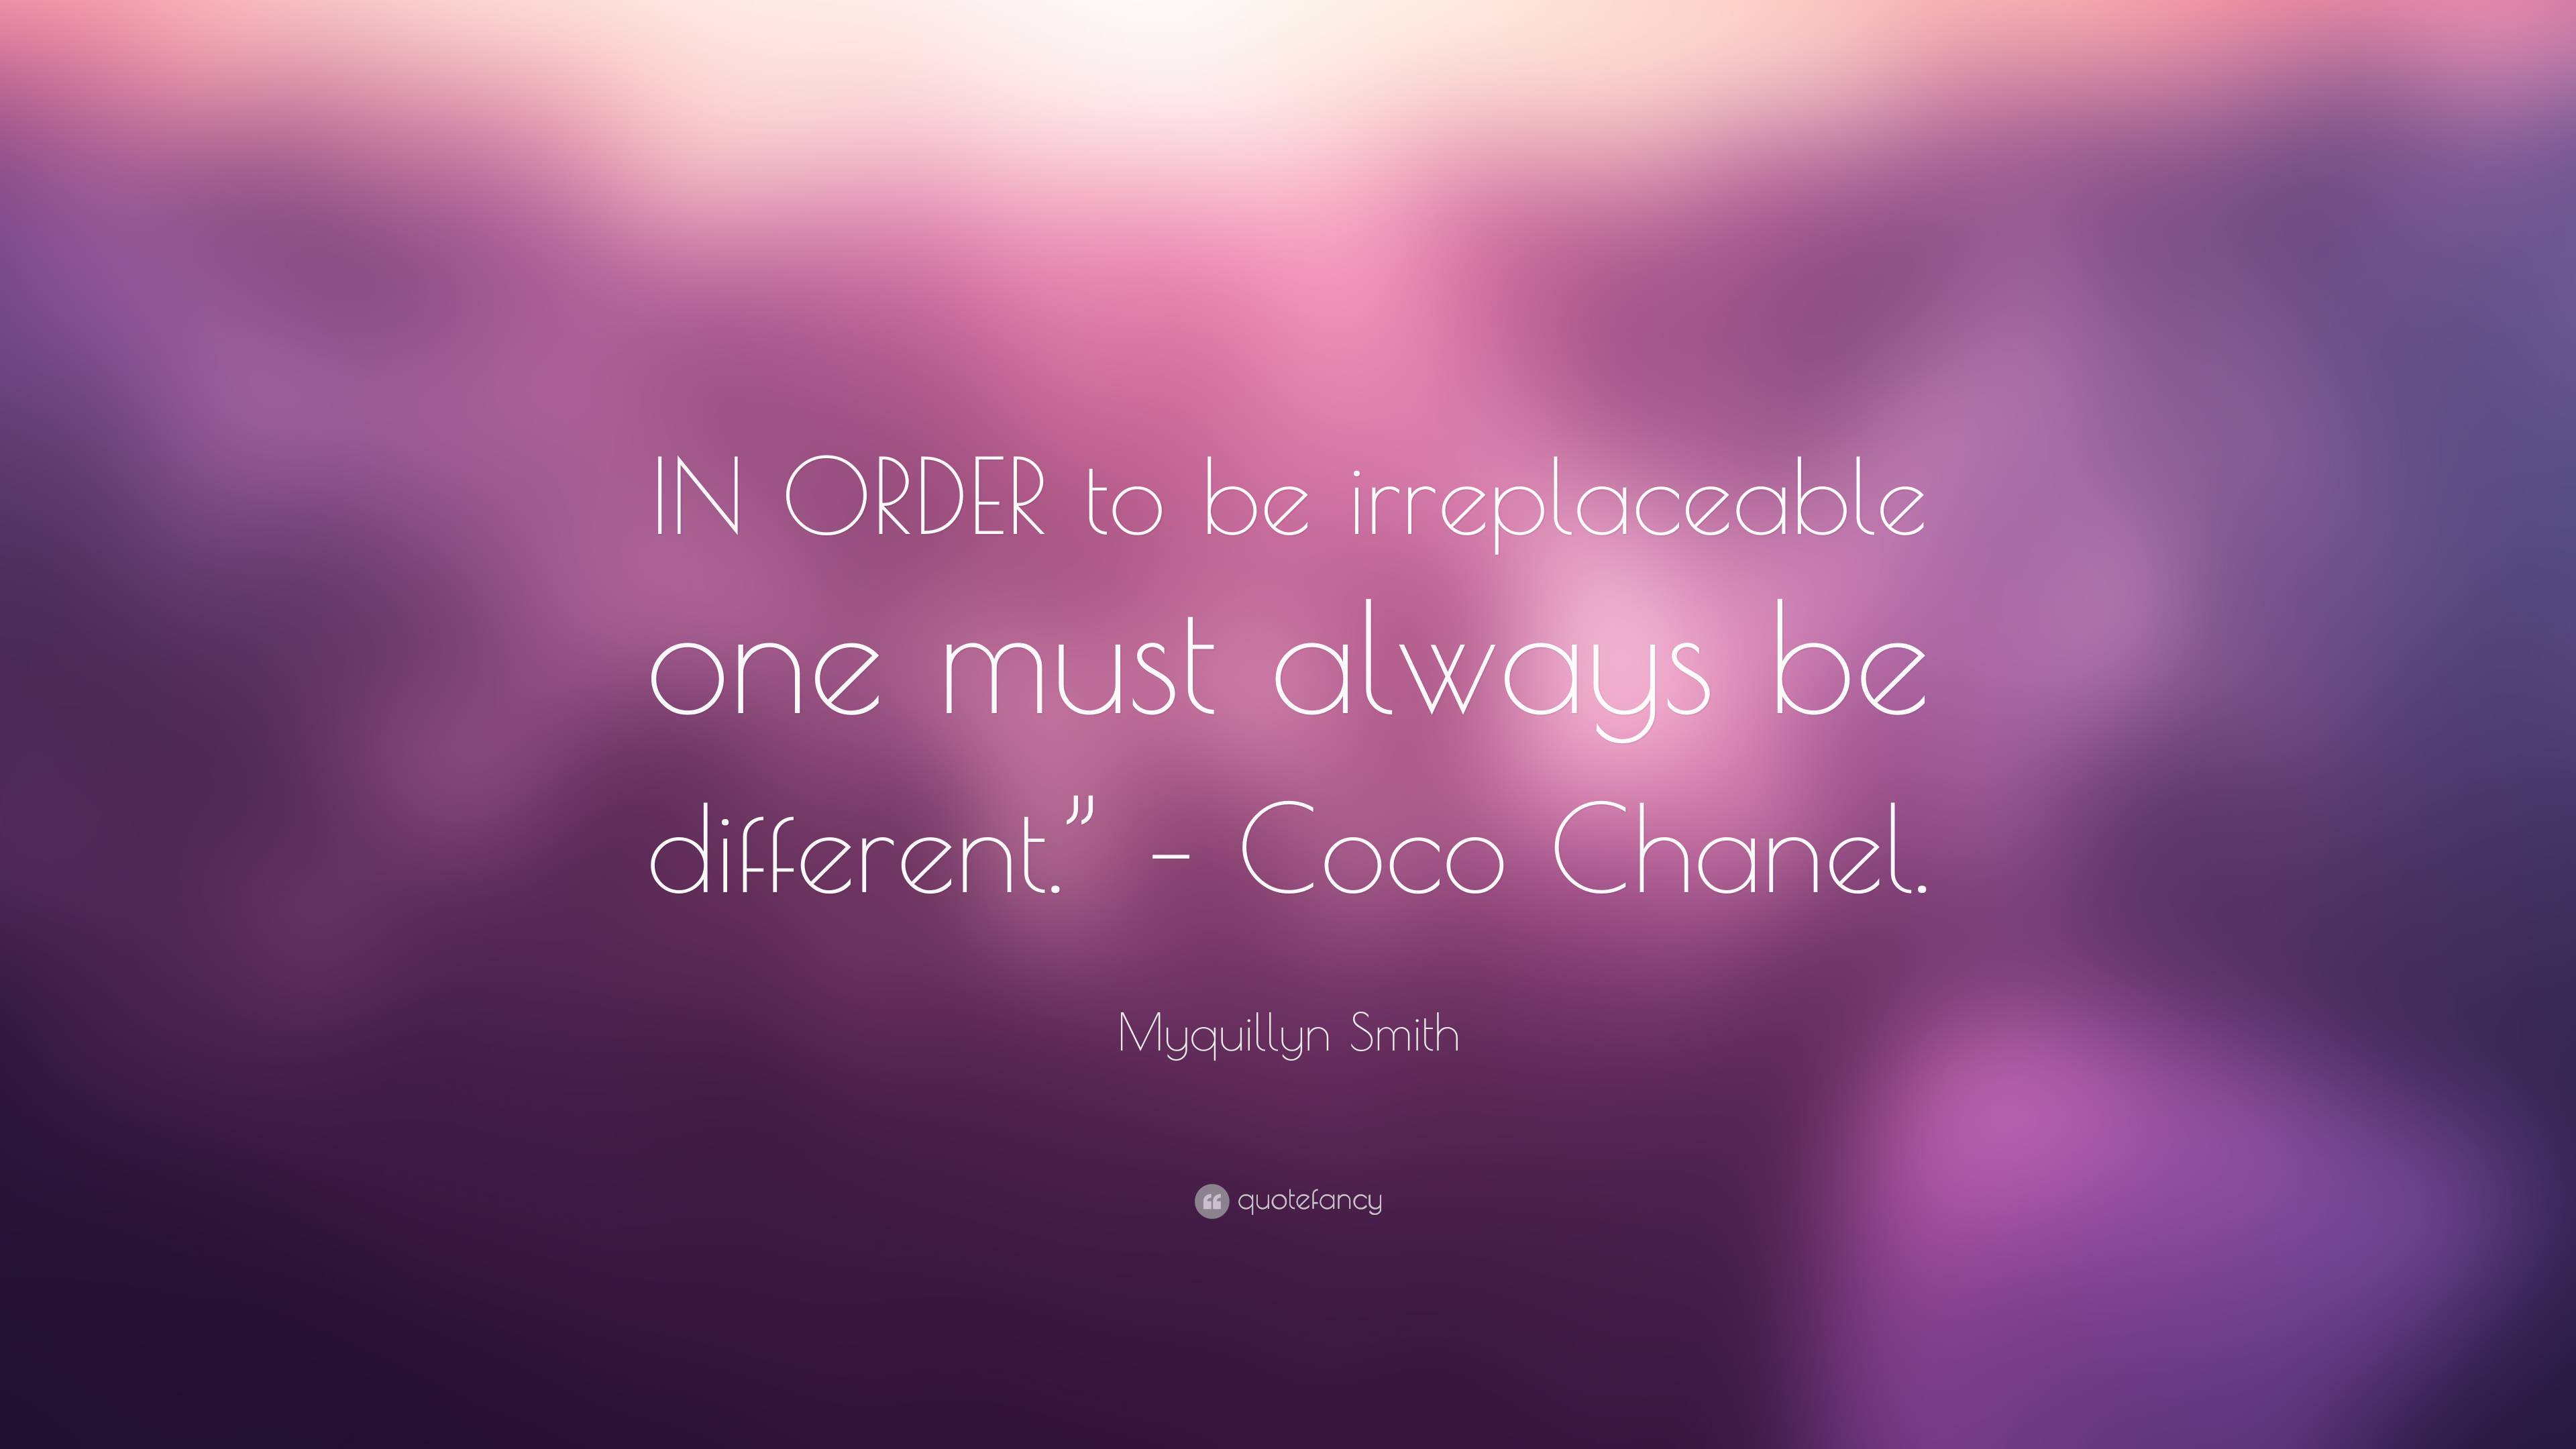 Myquillyn Smith Quote: “IN ORDER to be irreplaceable one must always be  different.” – Coco Chanel.”